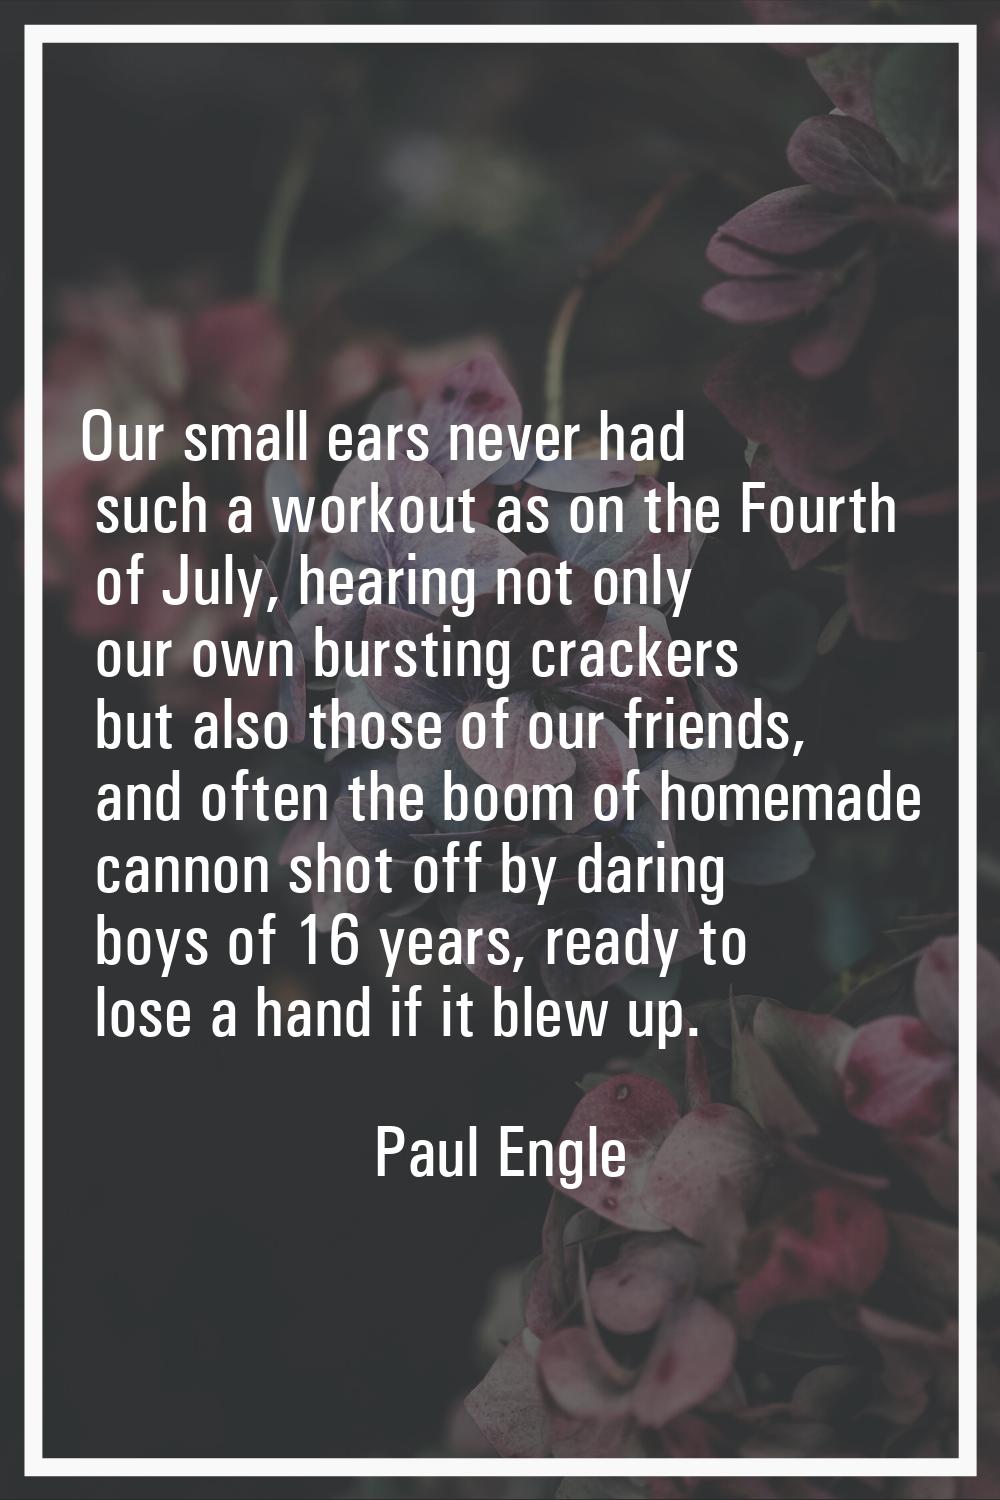 Our small ears never had such a workout as on the Fourth of July, hearing not only our own bursting